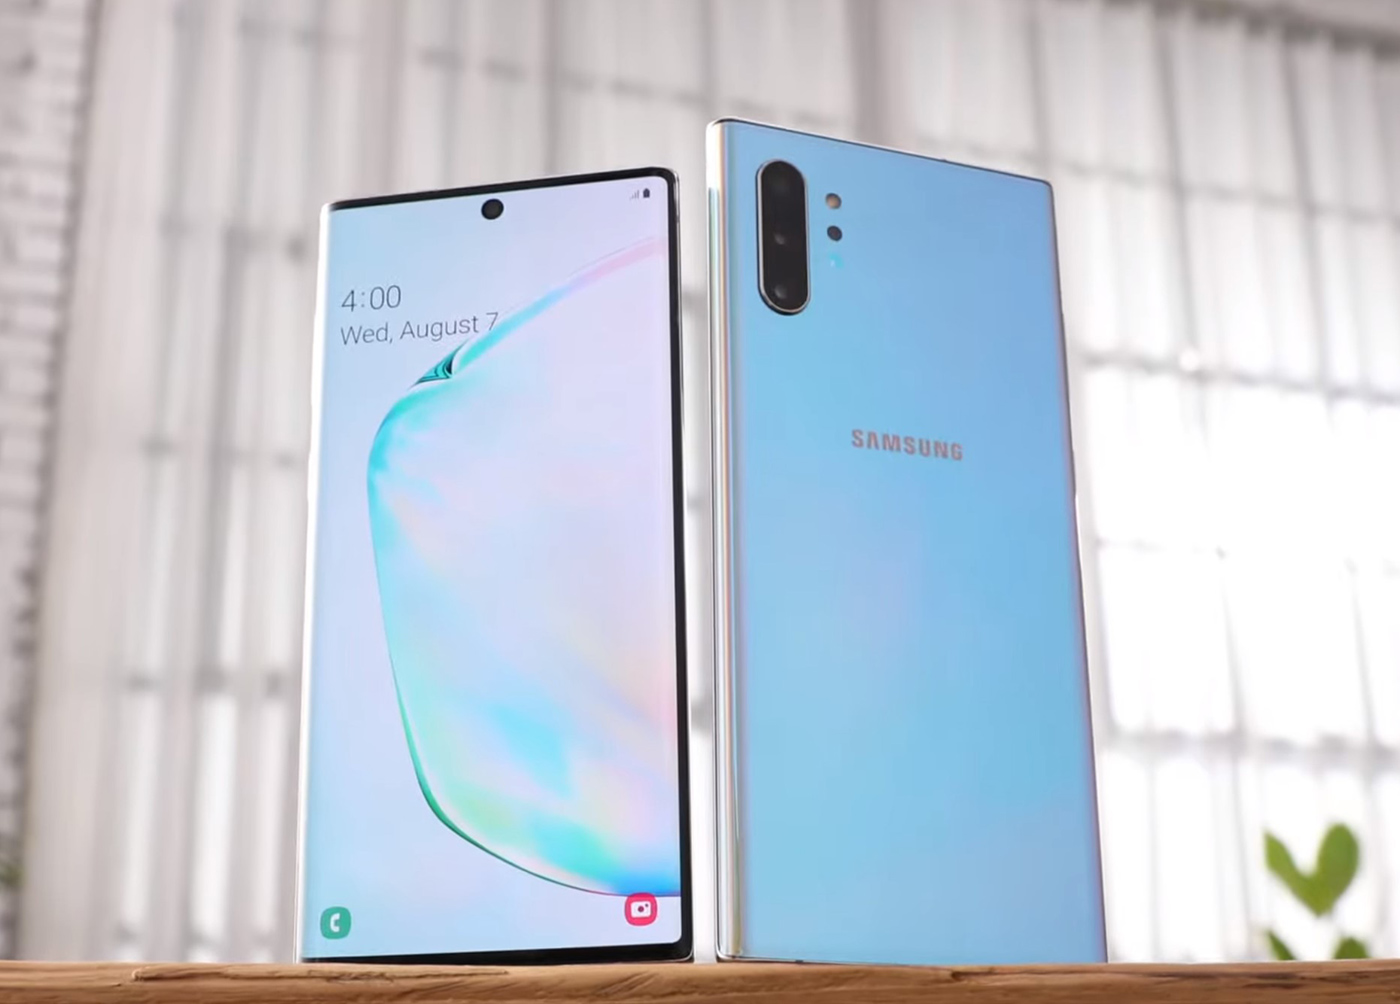 Samsung Galaxy Note 10 Lite With Triple Rear Cameras, Infinity-O Display,  and S Pen Launched: Price, Specifications